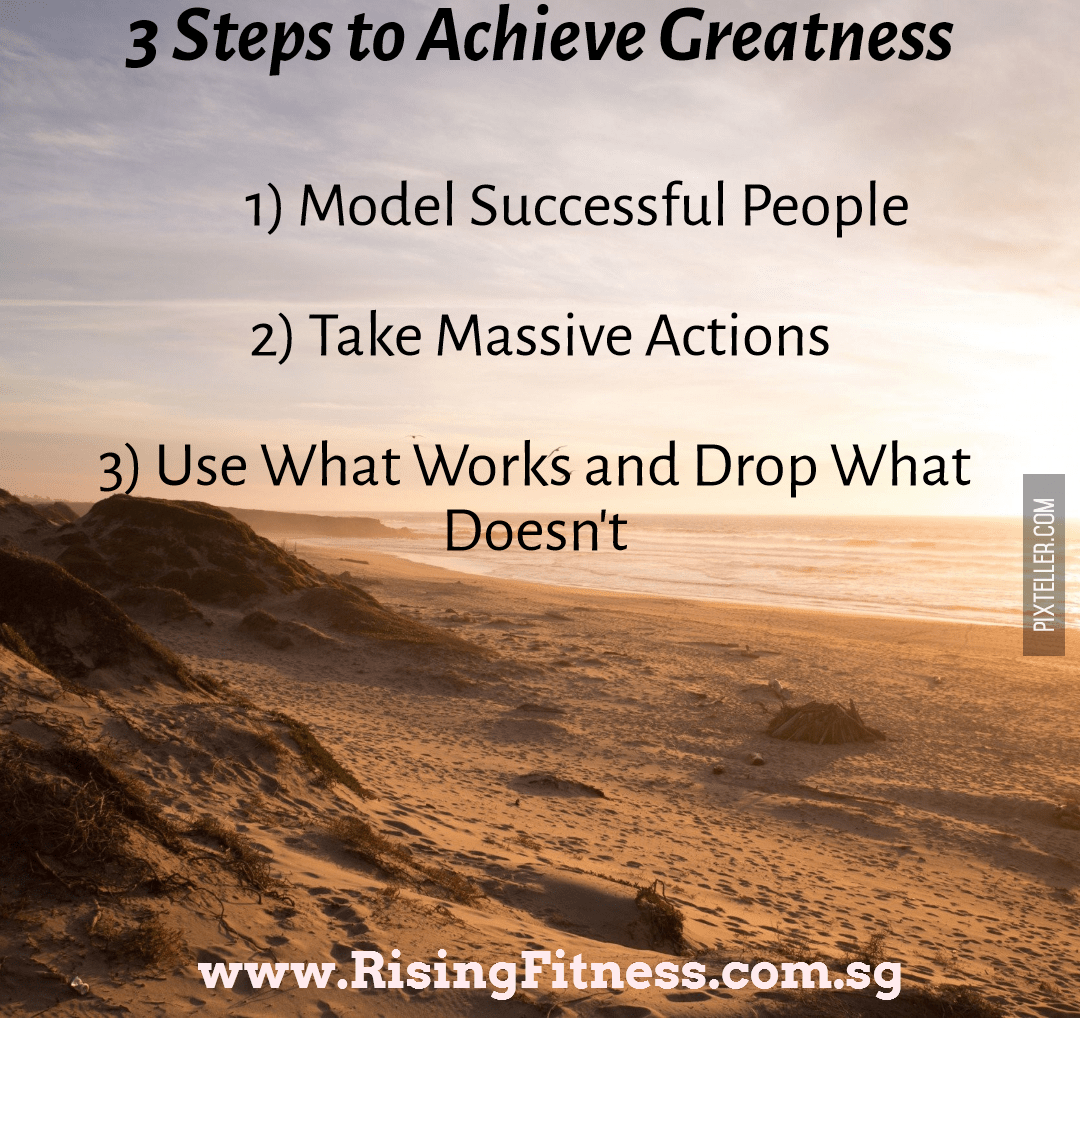 3 steps to great ness Design 